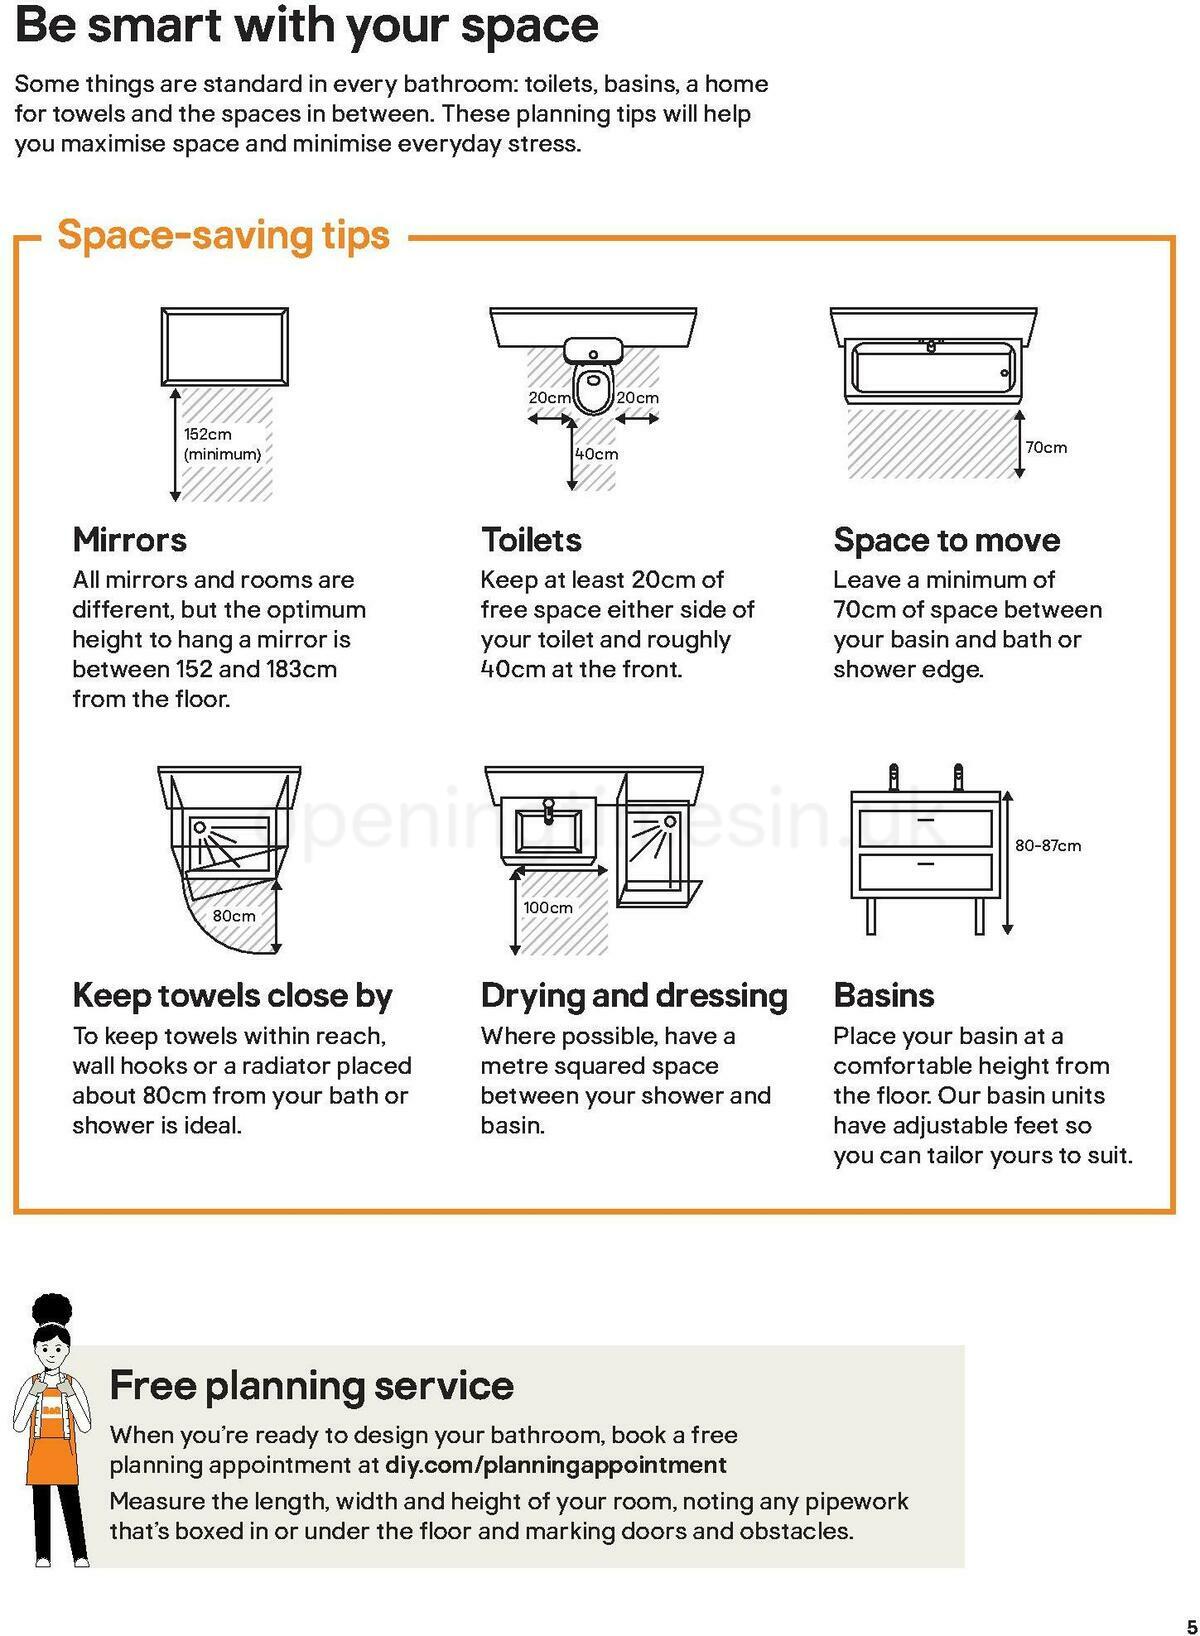 B&Q Bathroom Collections Offers from 1 April